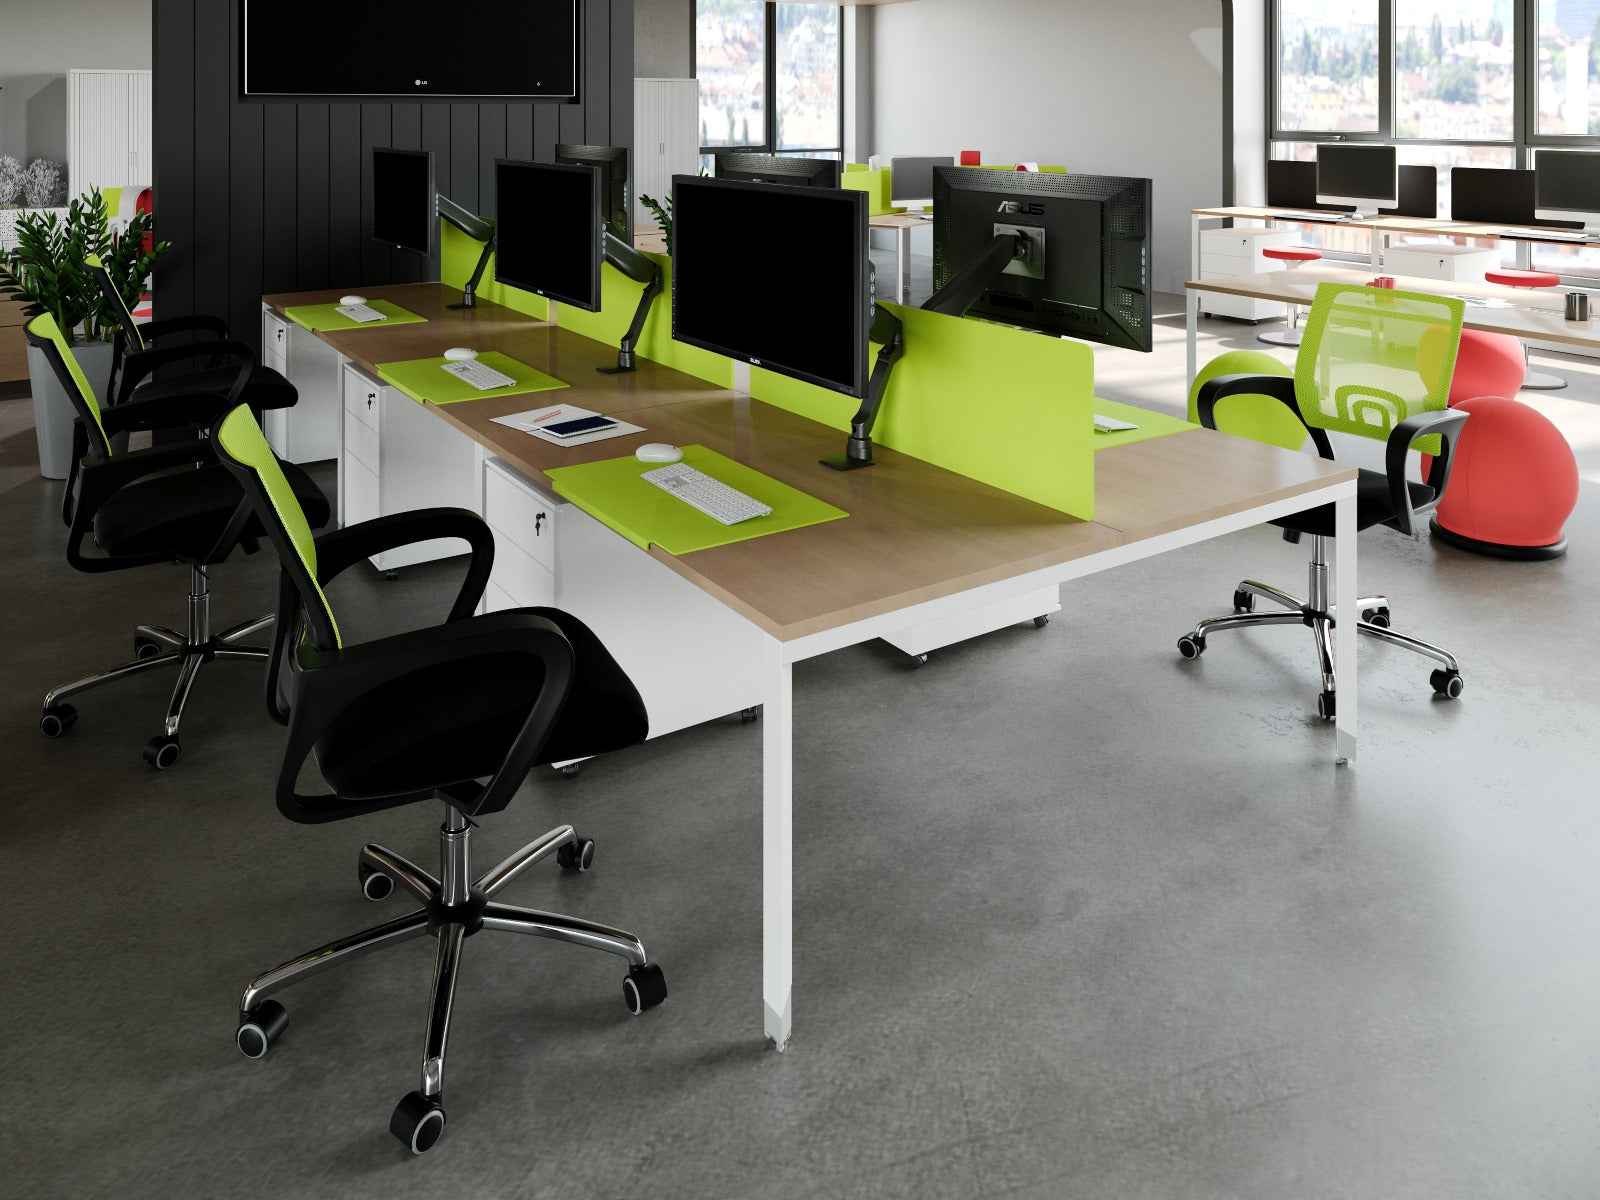 Why you need desk dividers and partition screens in your office